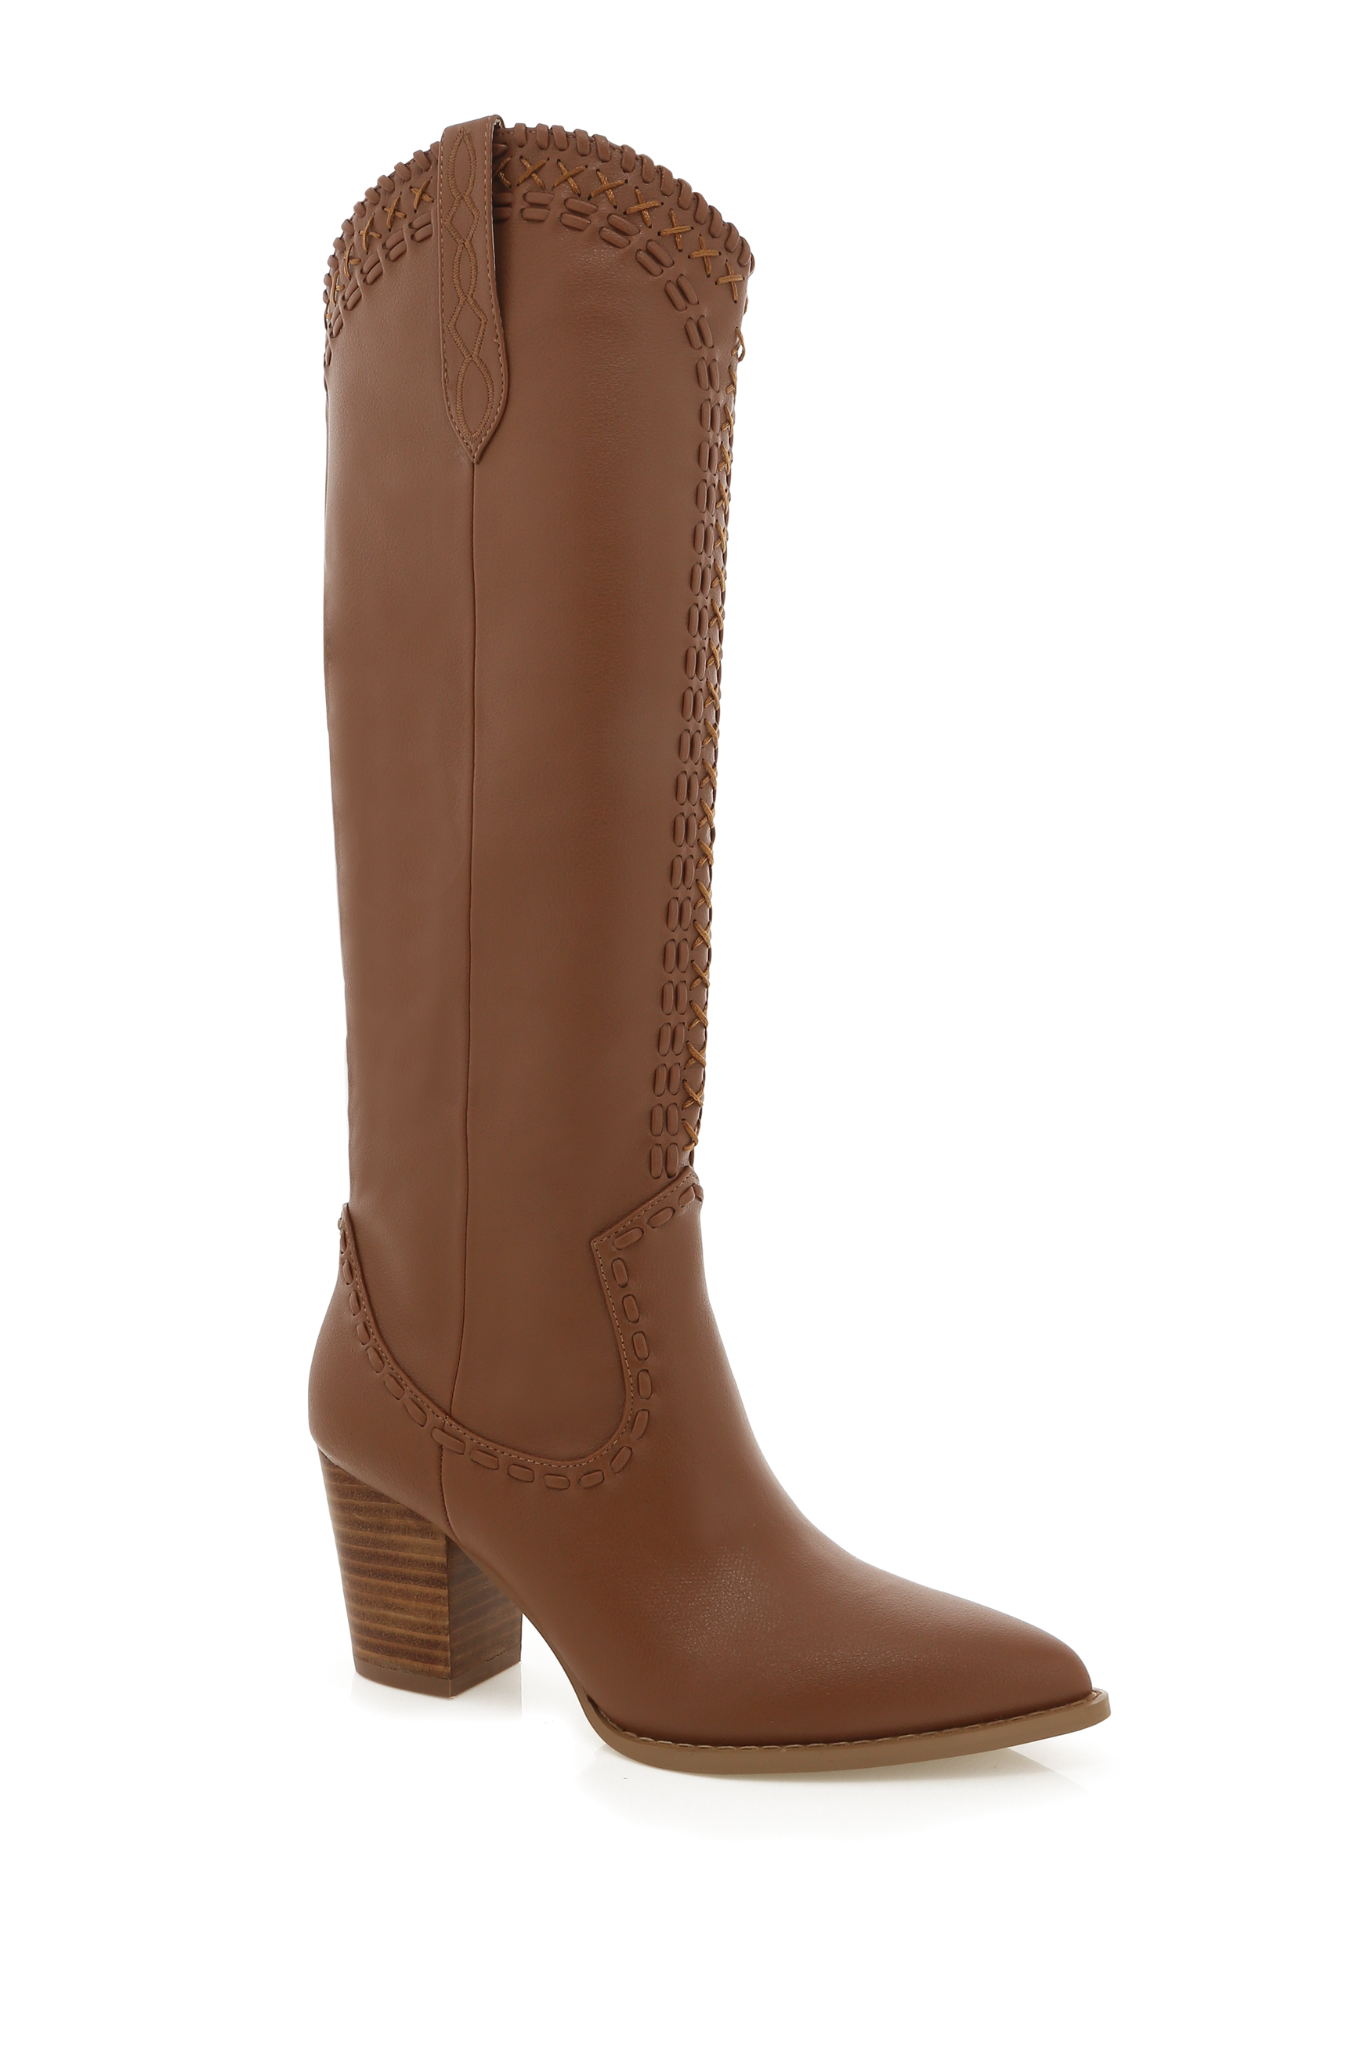 View 3 of Billini Finley Cowboy Boot, a Shoes from Larrea Cove. Detail: .